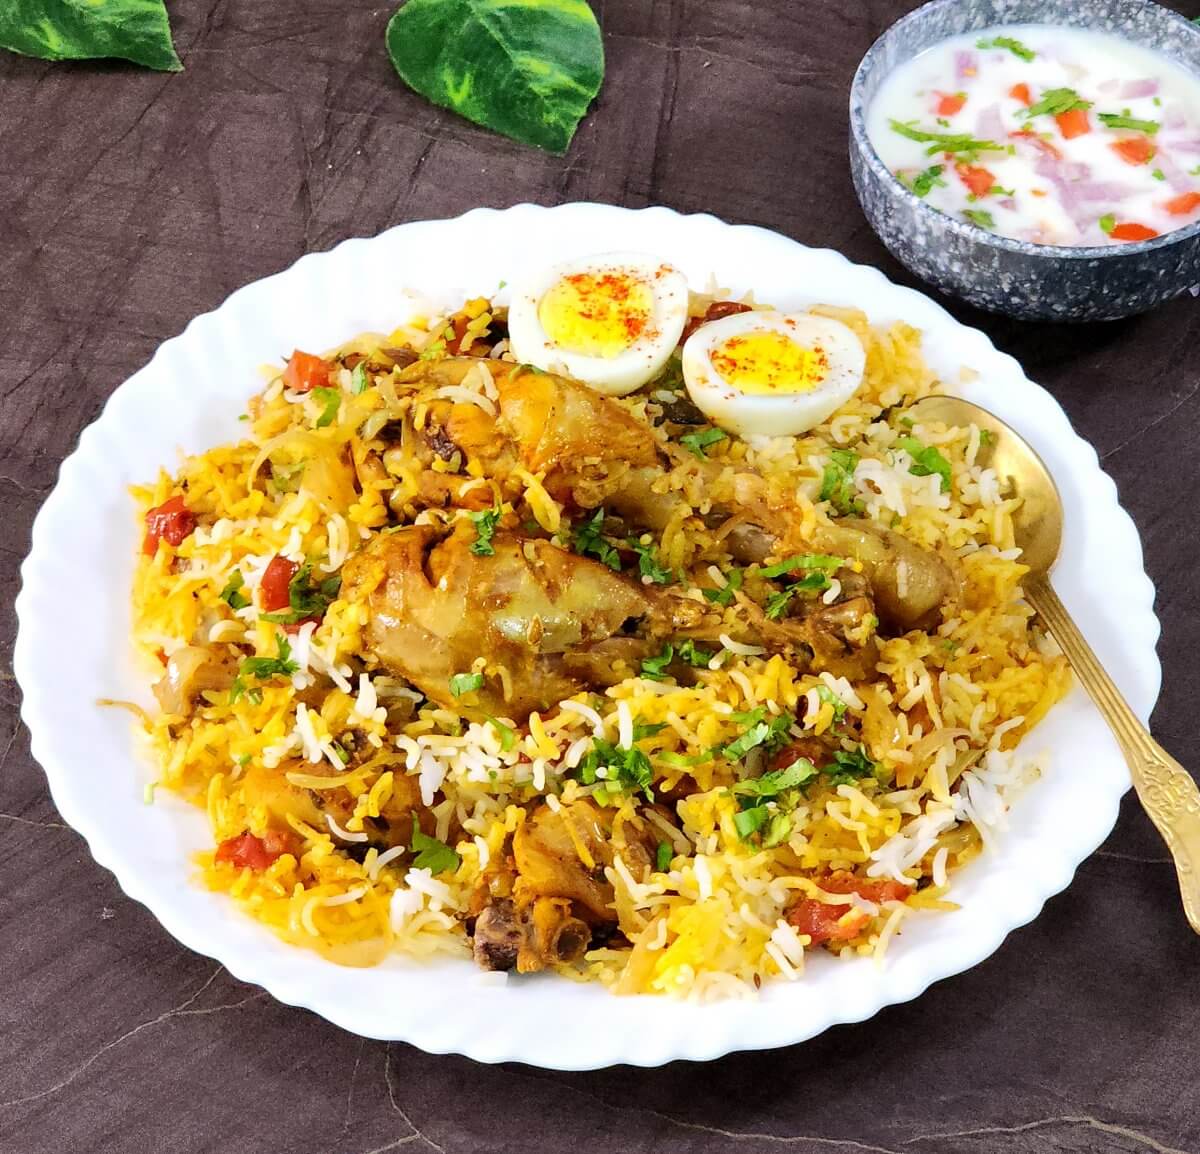 Hyderabadi Chicken Biryani served in a white plate along with boiled eggs and raita.